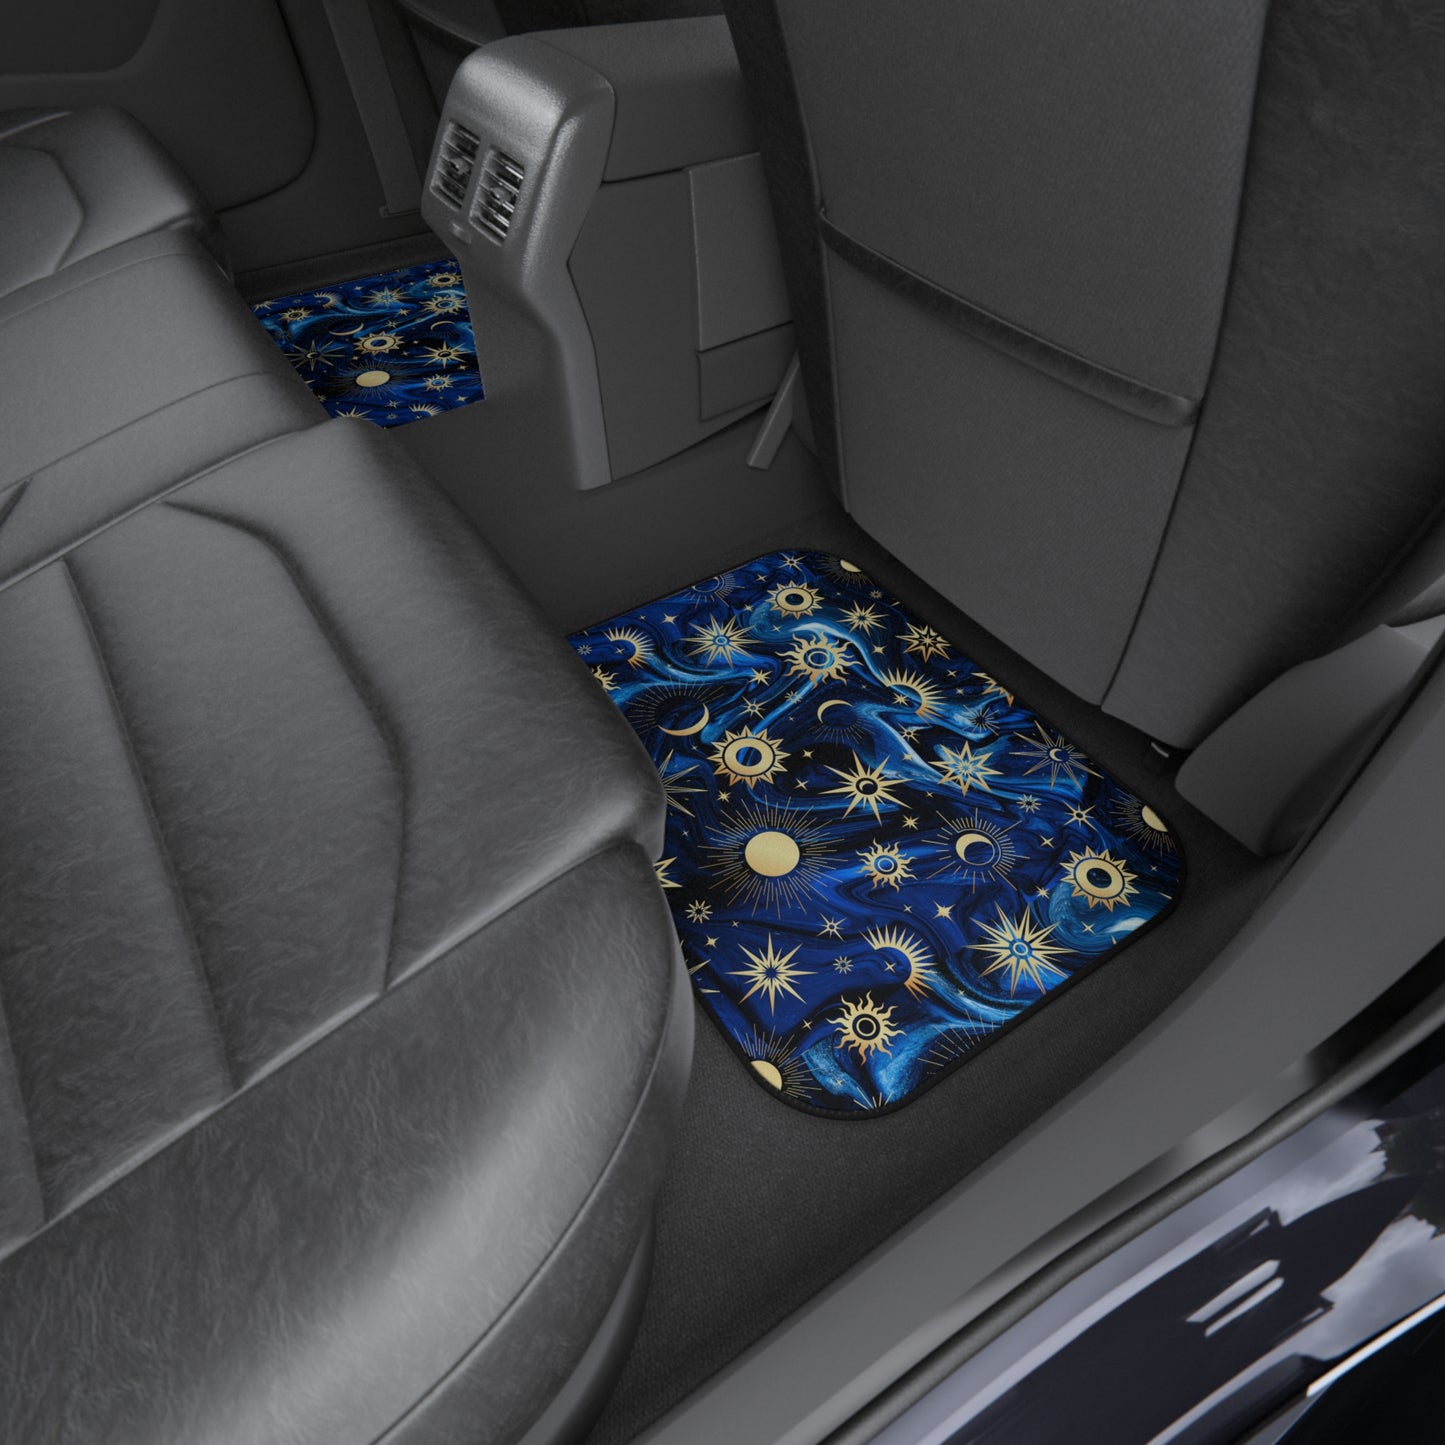 Car Mats - Celestial Blue and Black Stars, Moon, and Sun Car Mats (Set of 4), Easy to Clean with a Vacuum or a Cool Water Rinse, Non-Slip Rubber Backing